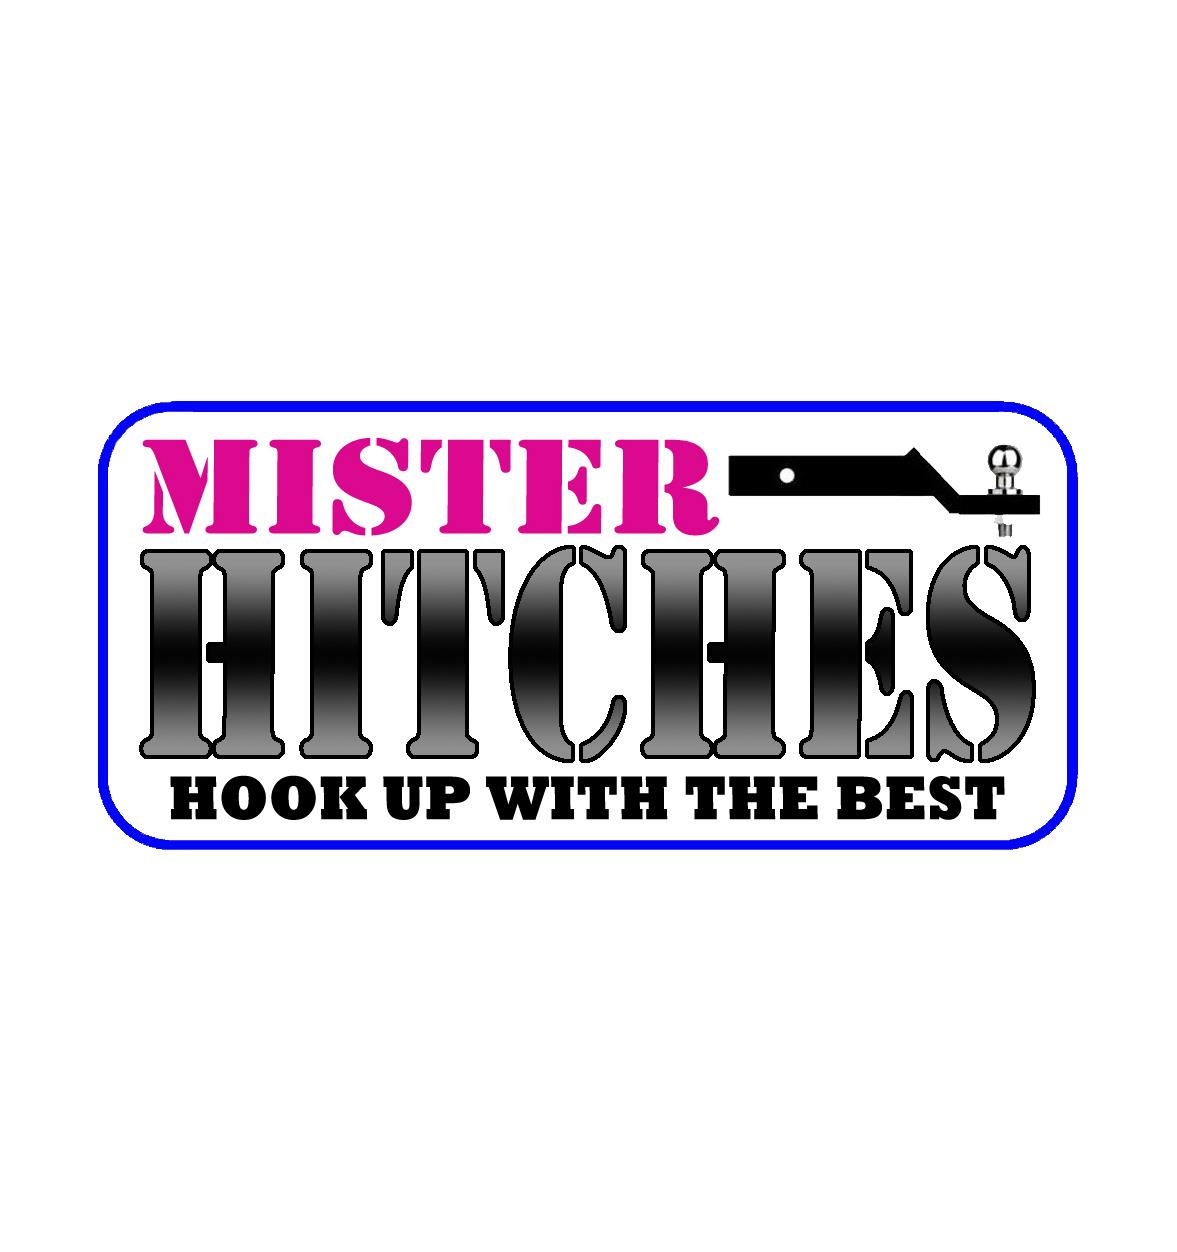 Mister Hitches